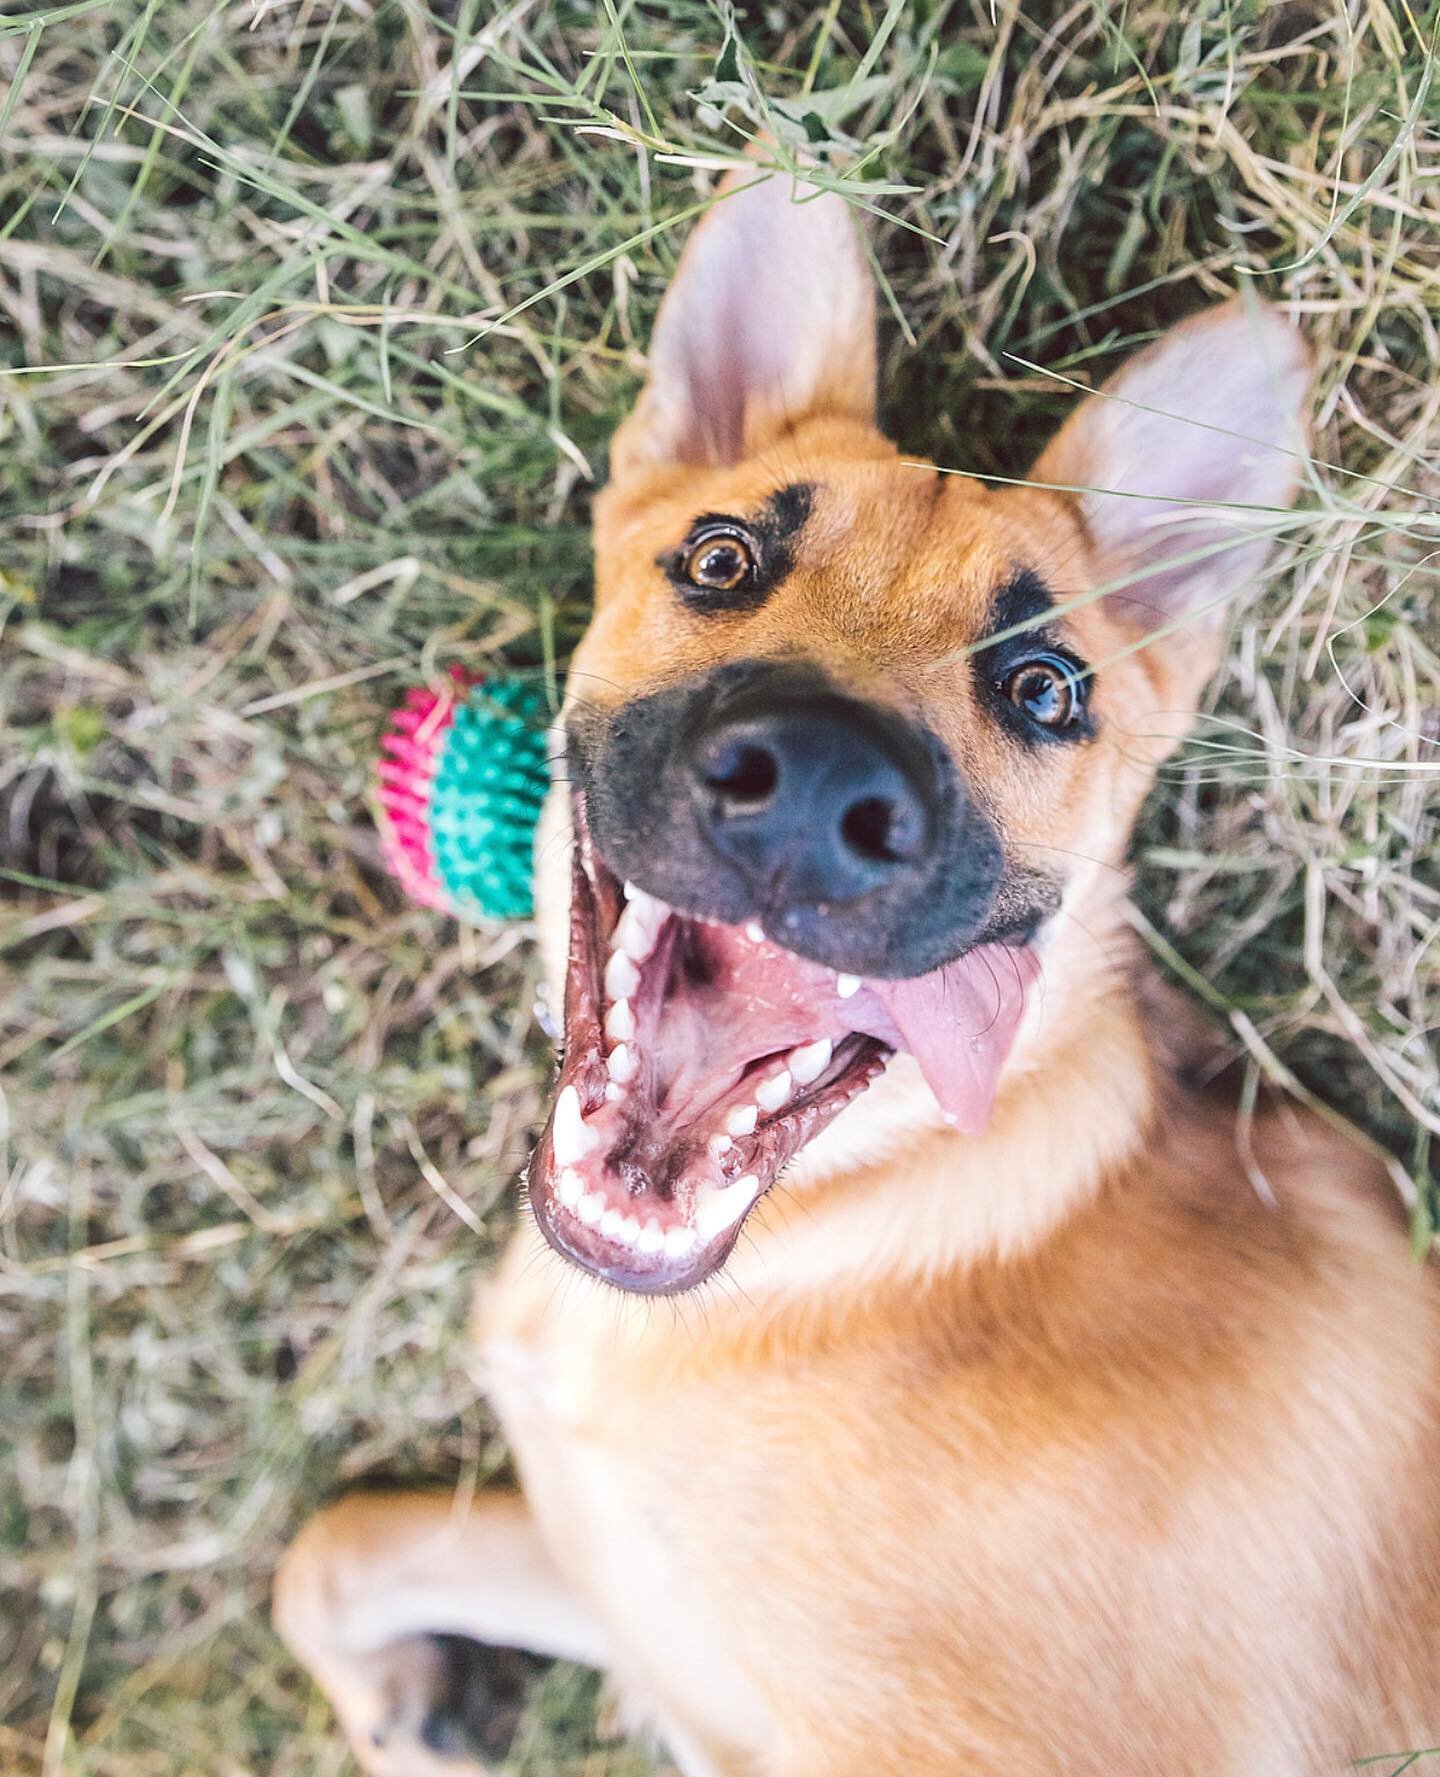 Rusty, the 6mo old Shepherd mix. Was one of the original hyenas in the Lion King but got fired because he was too goofy. 😔 Still likes to laugh at everything though.